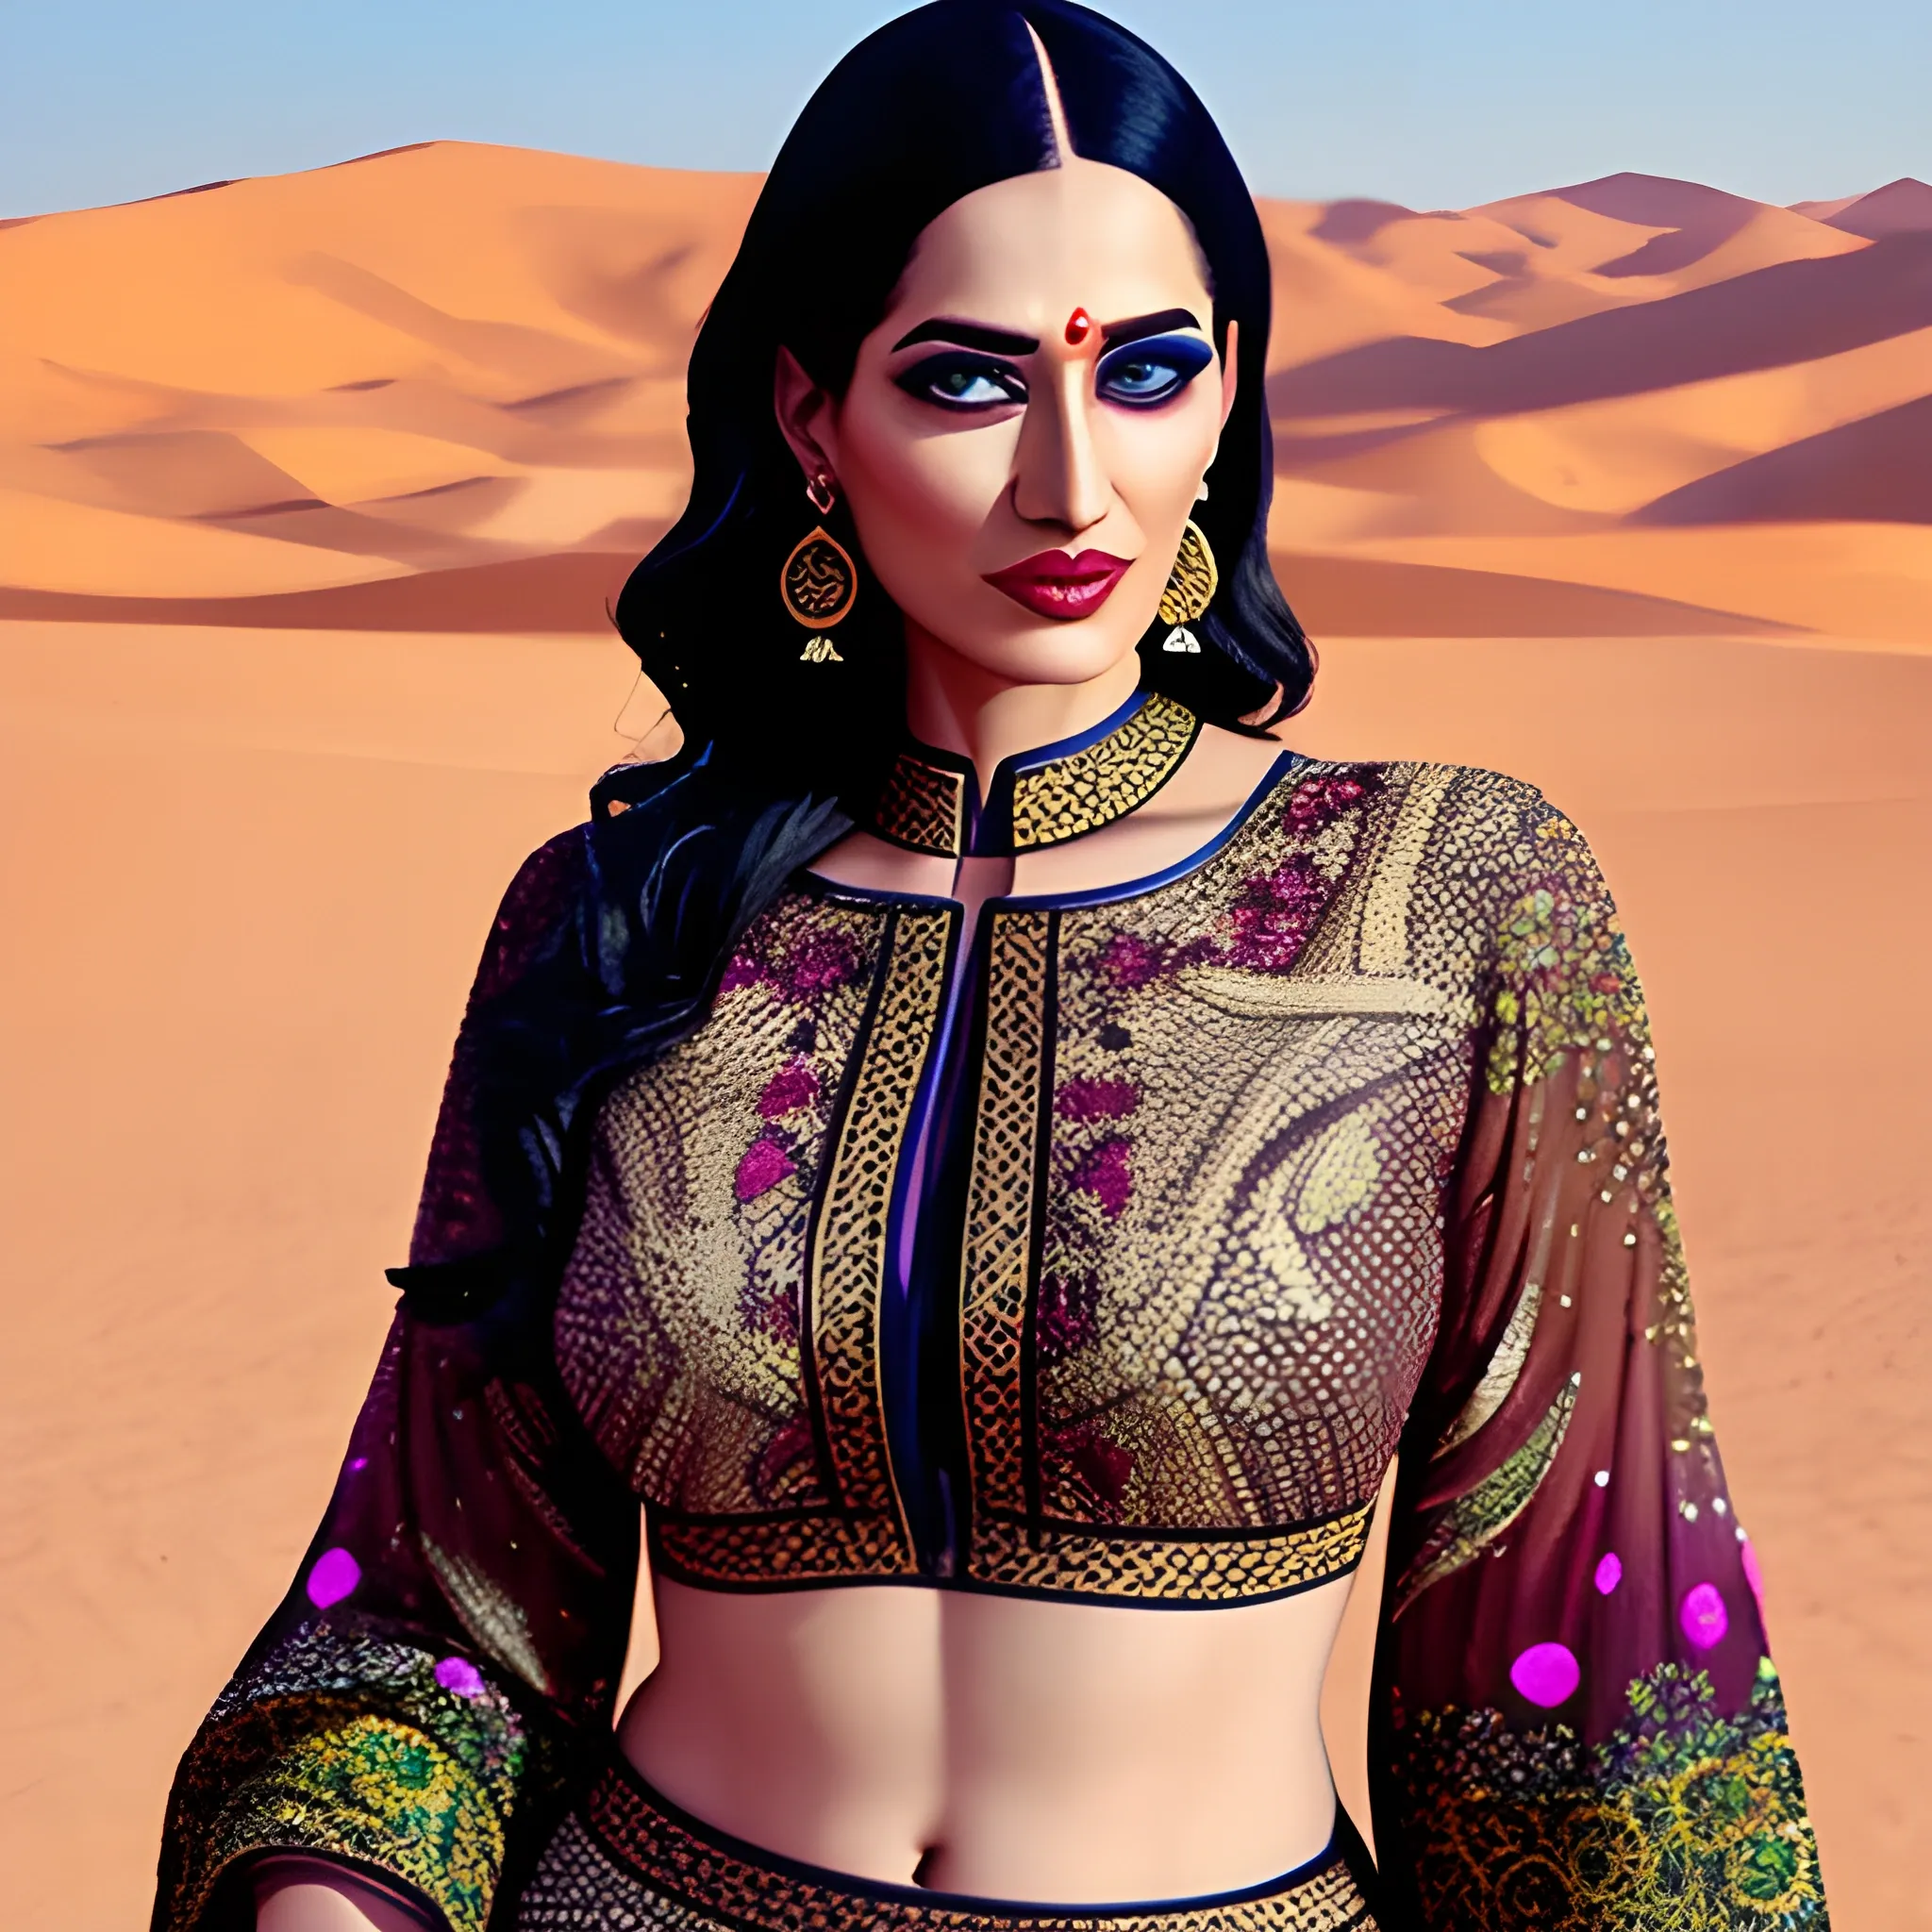 beautiful girl fair and blue eyes wearing masaba Gupta garment in the middle of the desert

realistic